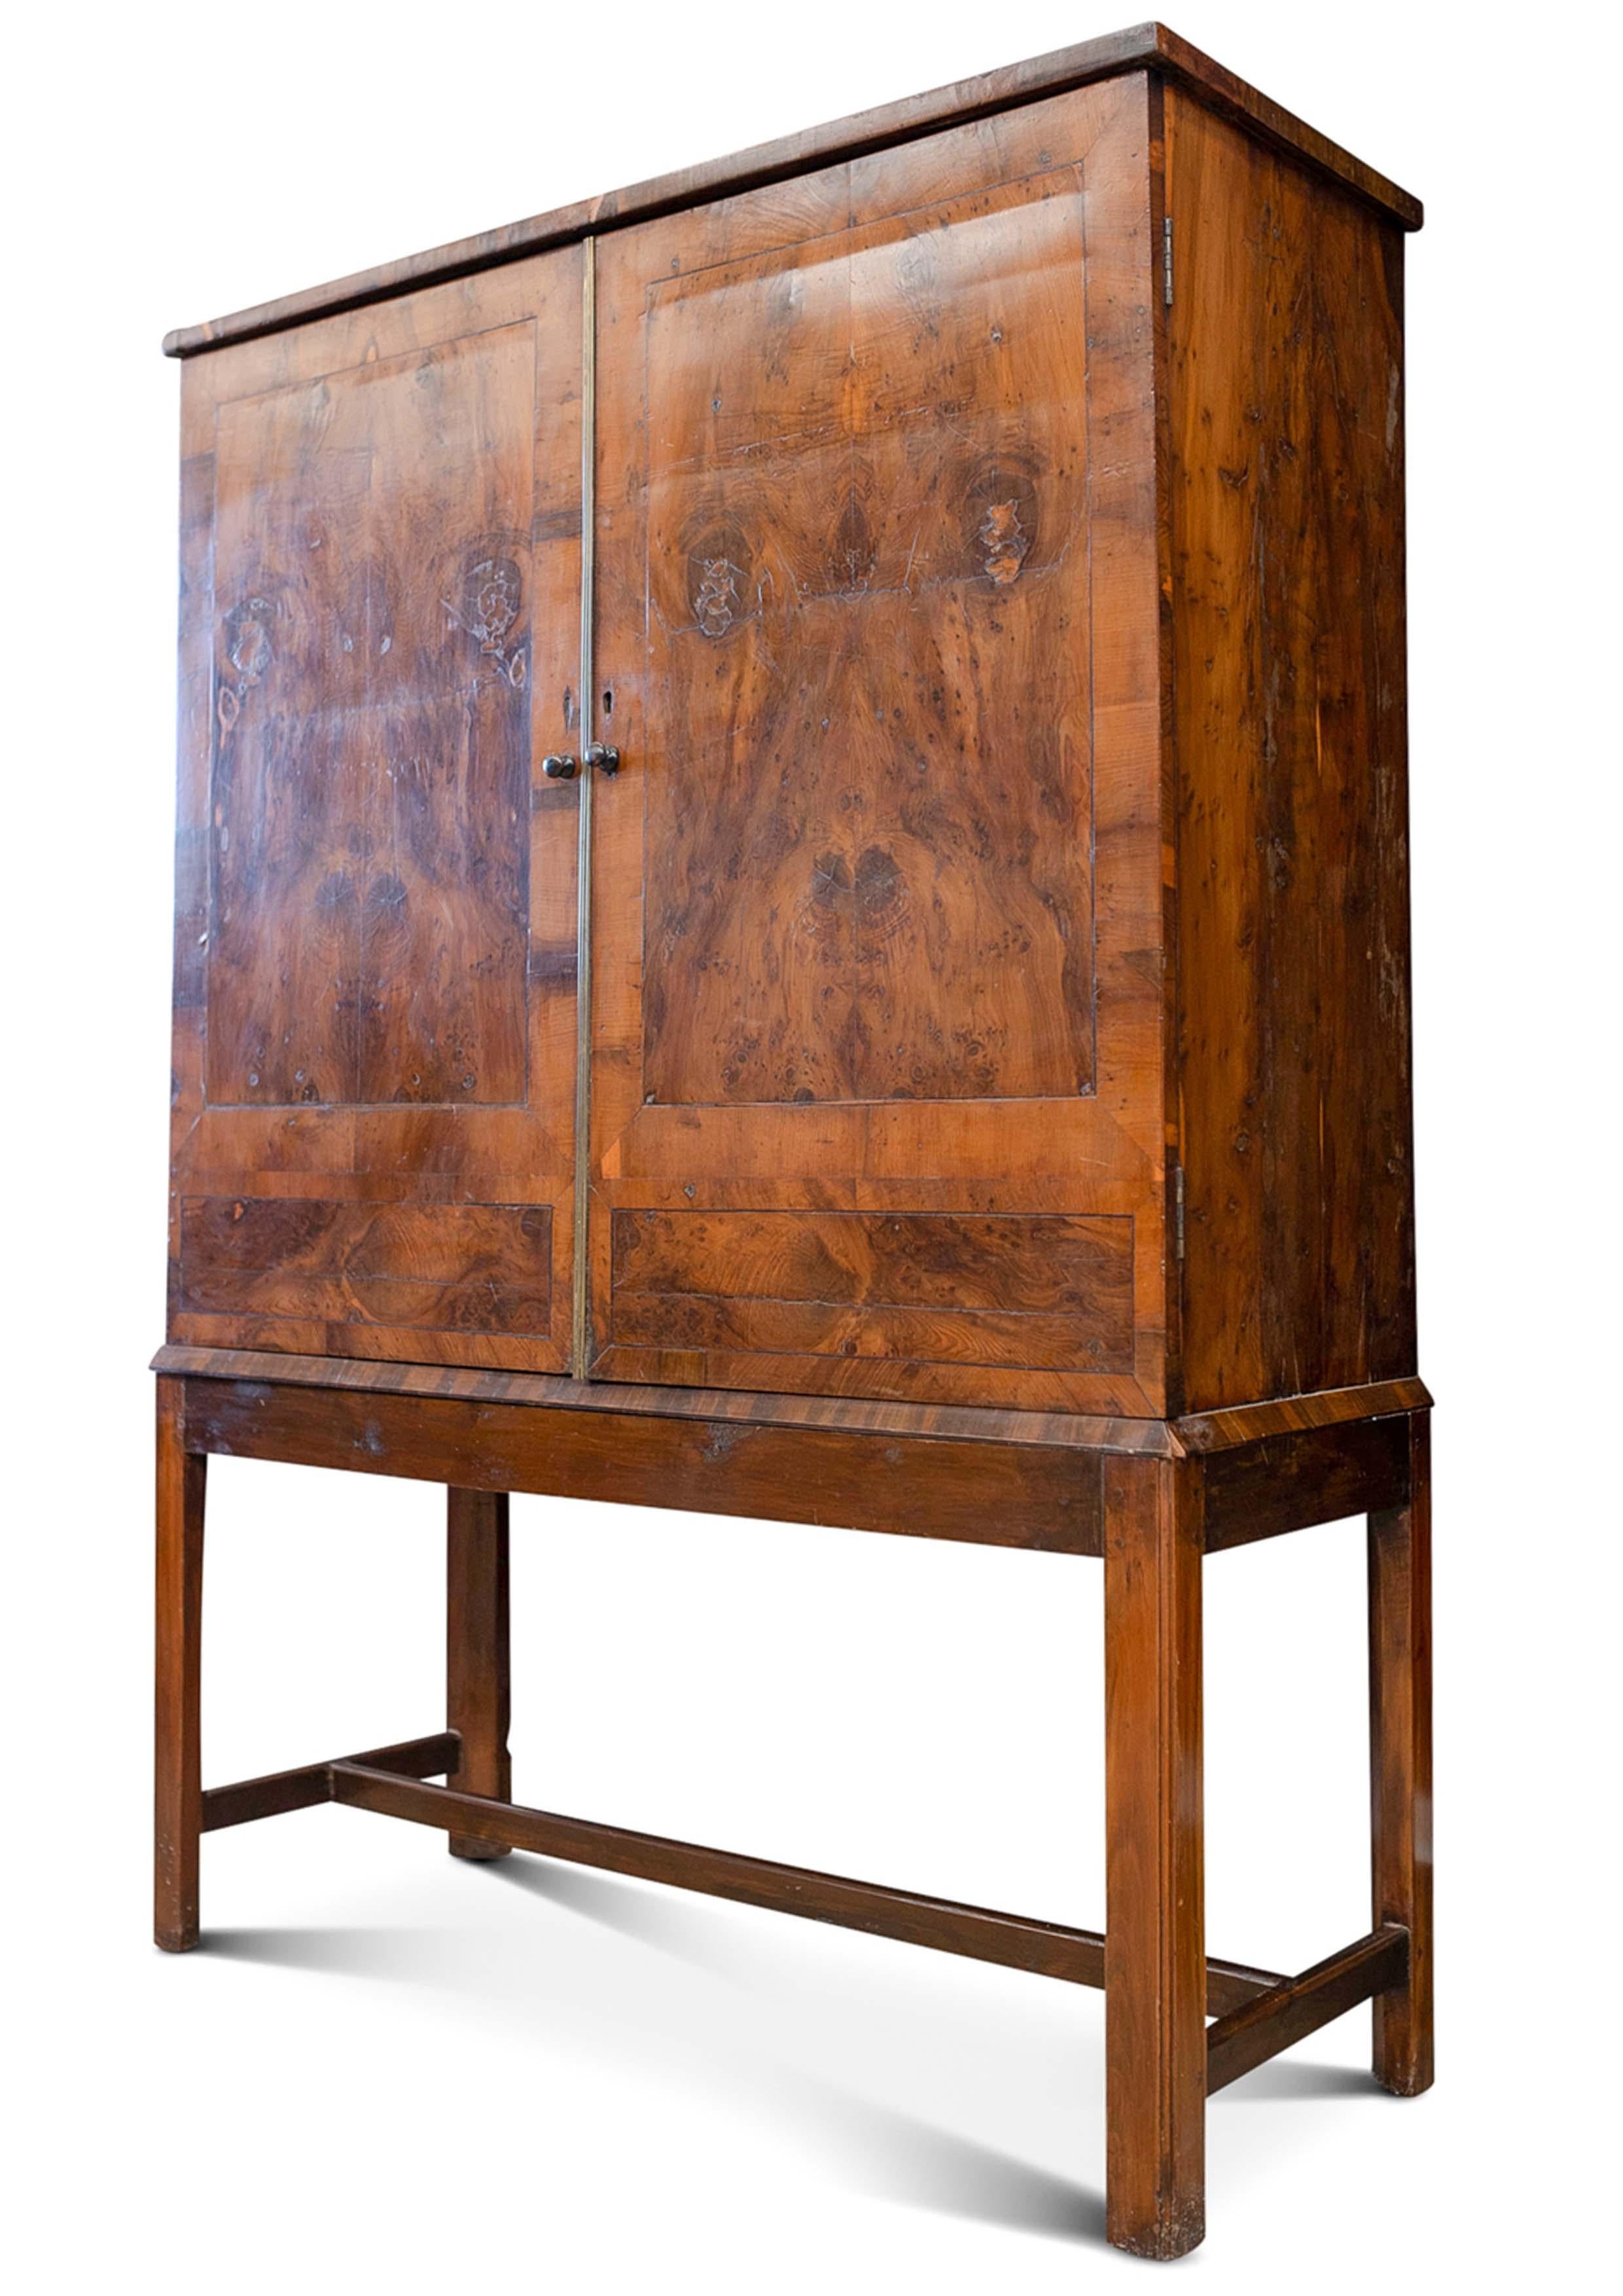 Sheraton Rare 18th Century Library Yew Wood Specimen Collectors Cabinet Chest on Stand For Sale